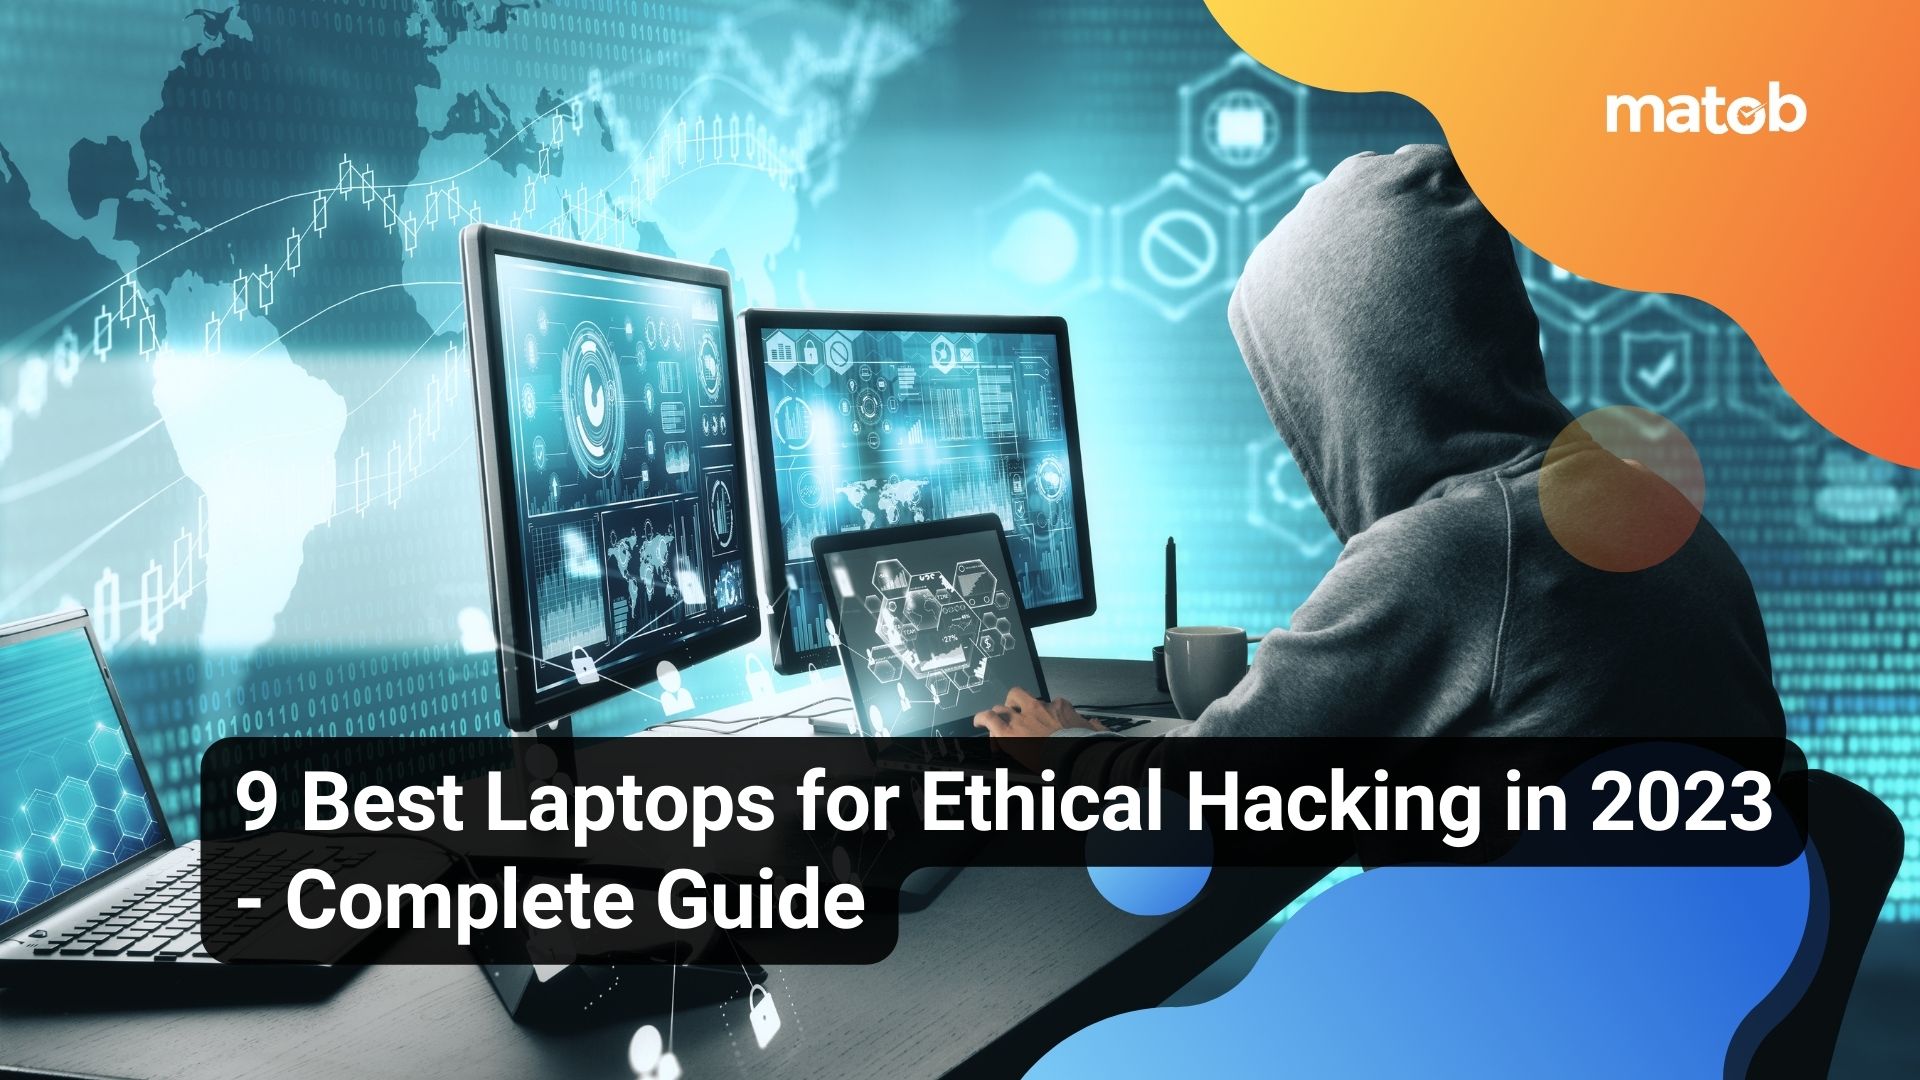 9 Best Laptops for Ethical Hacking in 2023 - Complete Guide